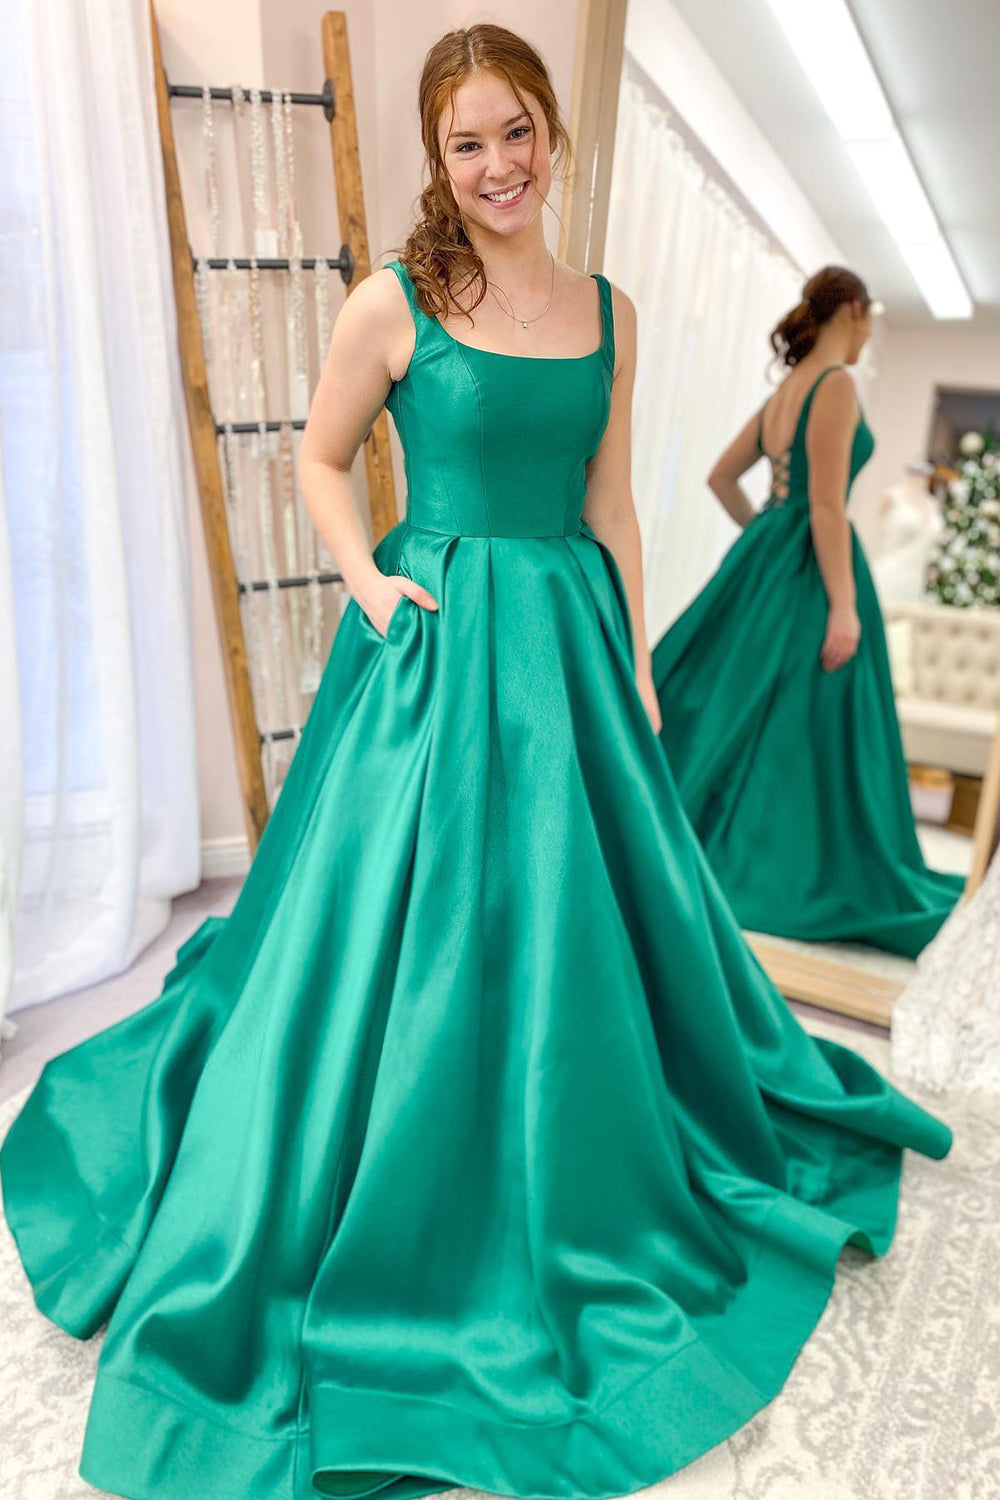 Classy Long A-line Spaghetti Straps Satin Backless Prom Dress With Pockets-BIZTUNNEL